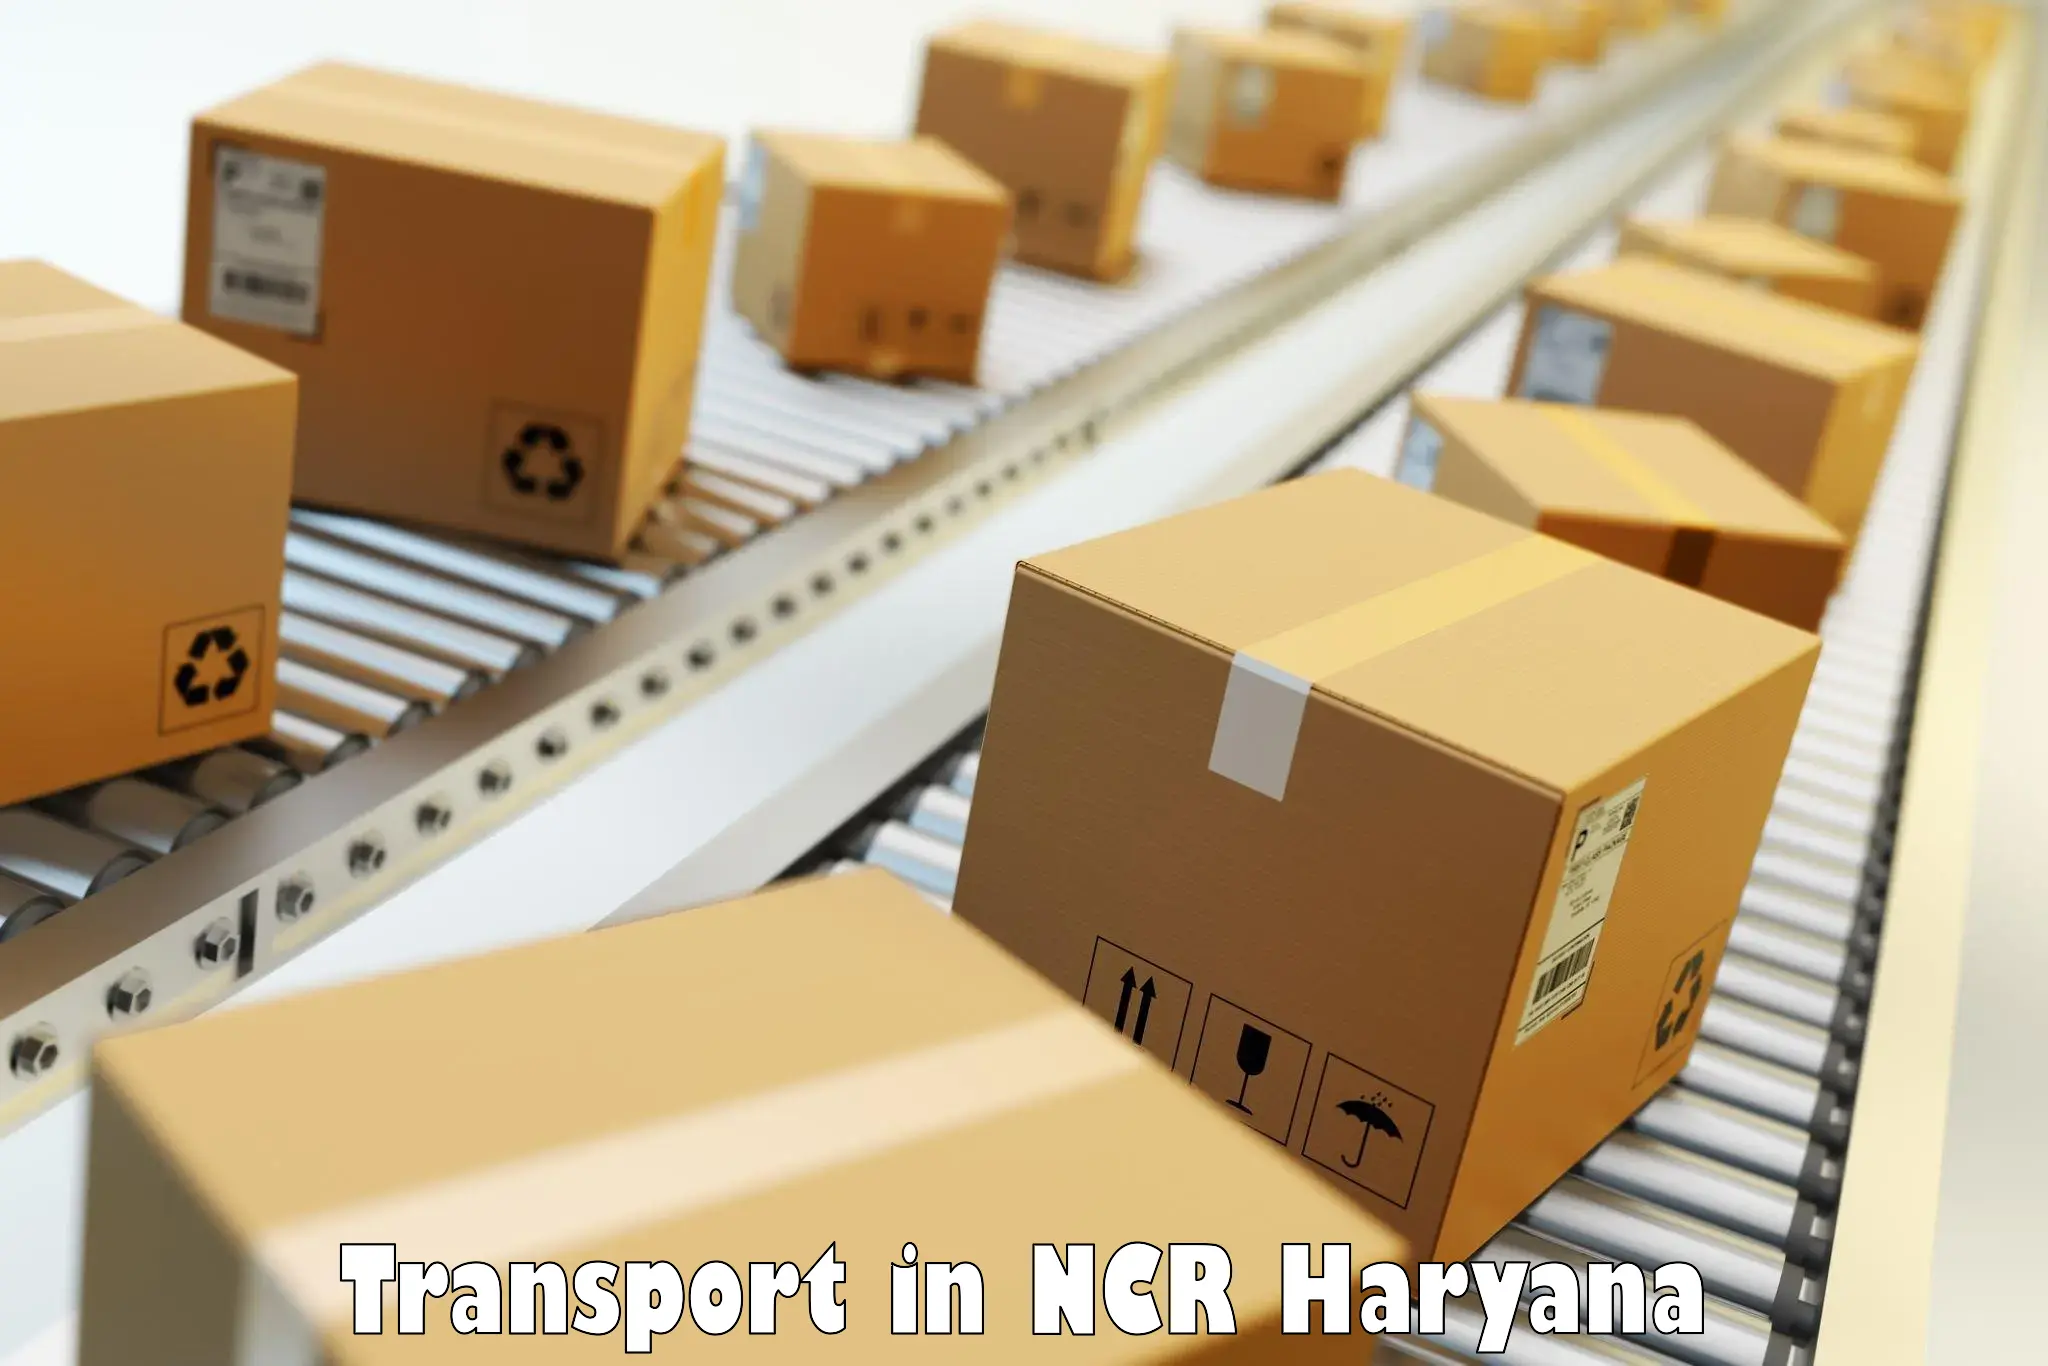 Two wheeler transport services in NCR Haryana